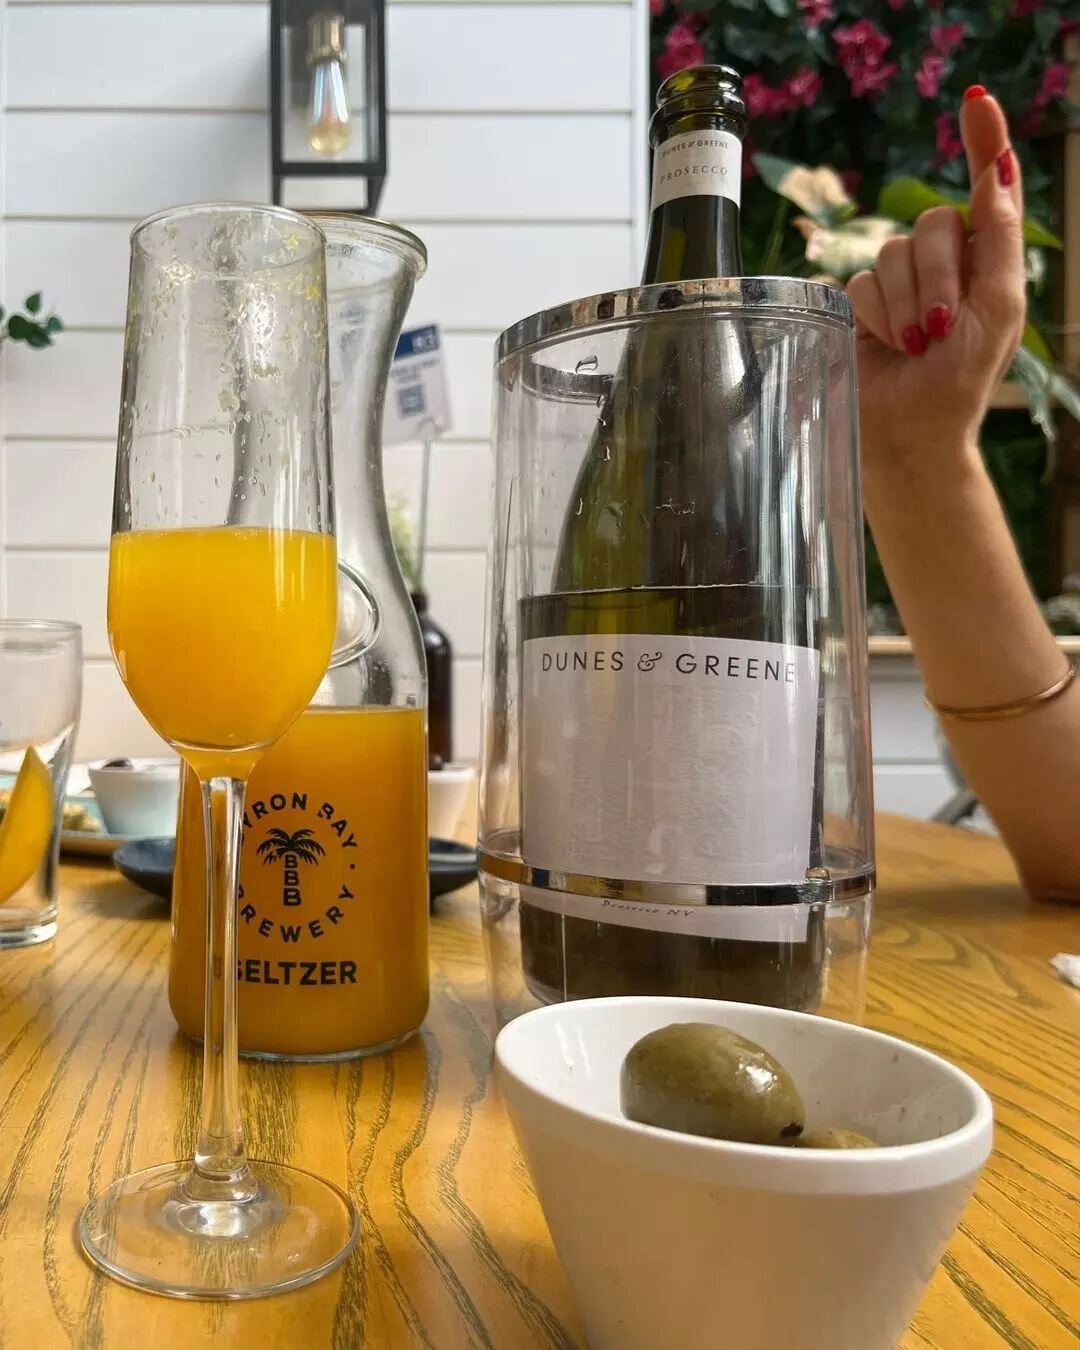 Mimosas + shared plates: an underrated combo&nbsp;👌&nbsp;Thanks for visiting @thepooroenophile!